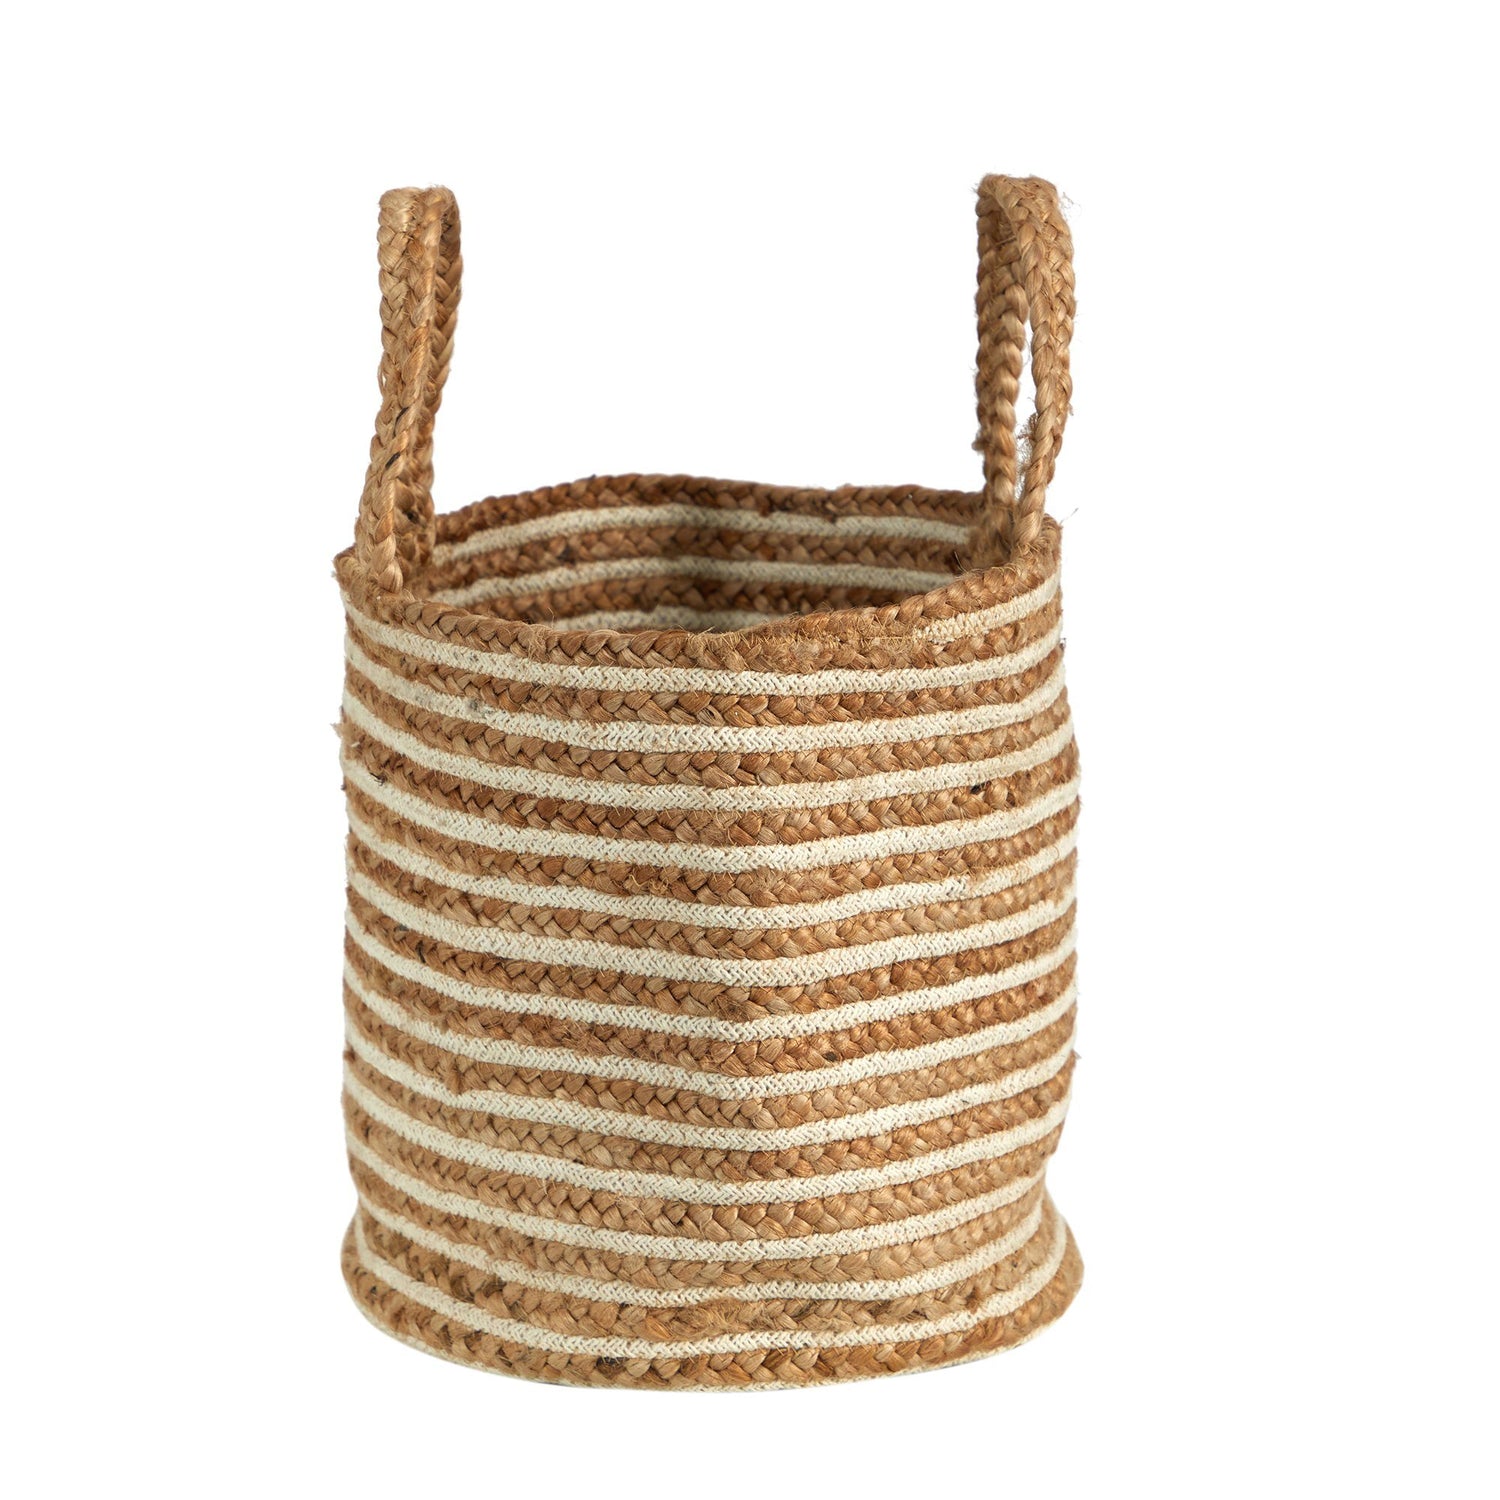 14” Boho Chic Basket Natural Cotton and Jute, Handwoven Stripe with Handles